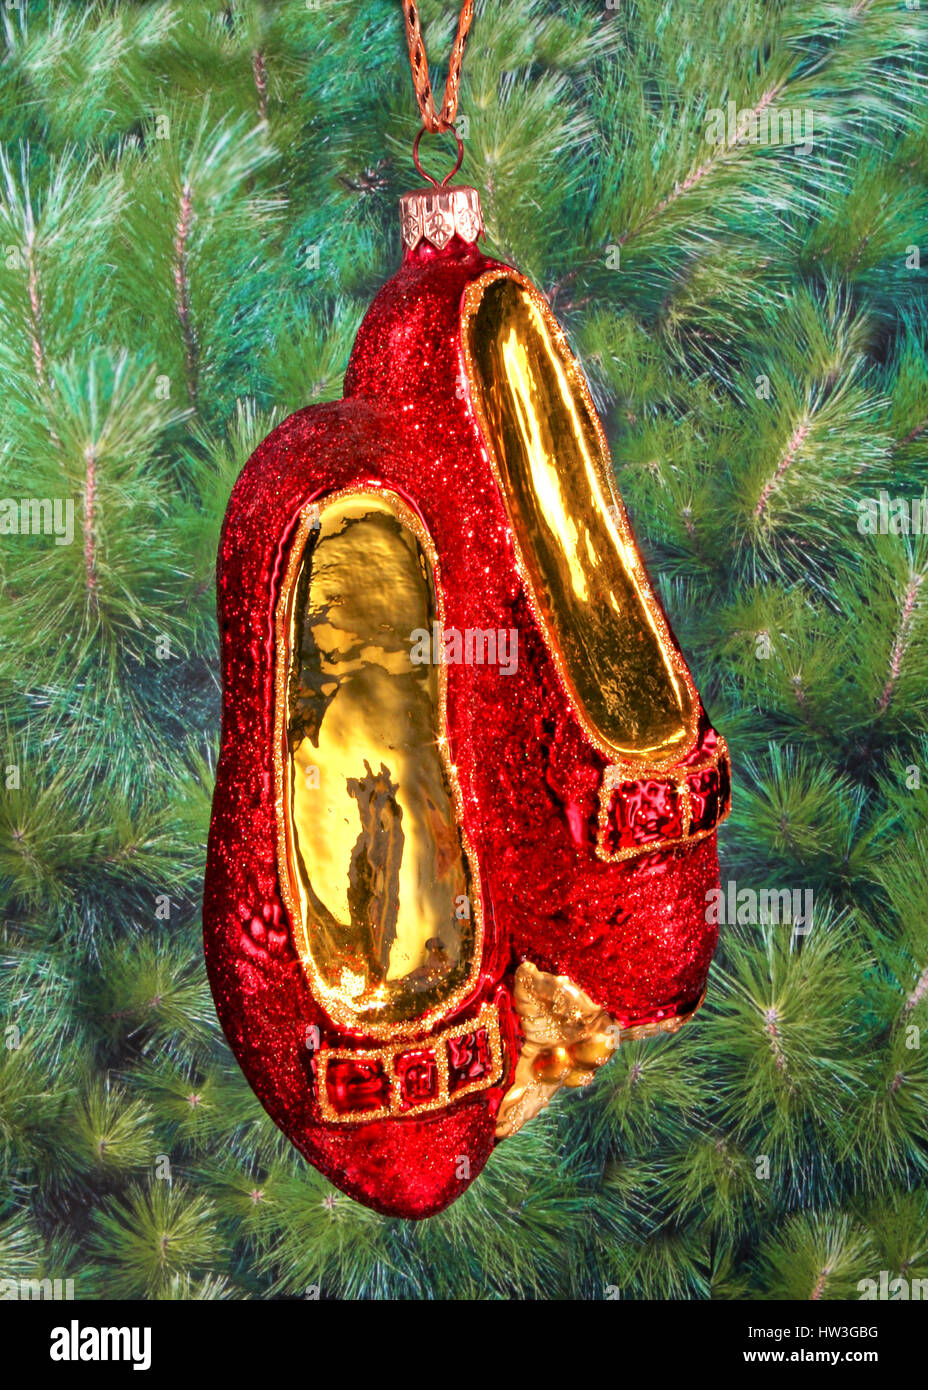 Christmas Bauble in the shape of the Ruby Slippers from the Wizard of Oz  Stock Photo - Alamy